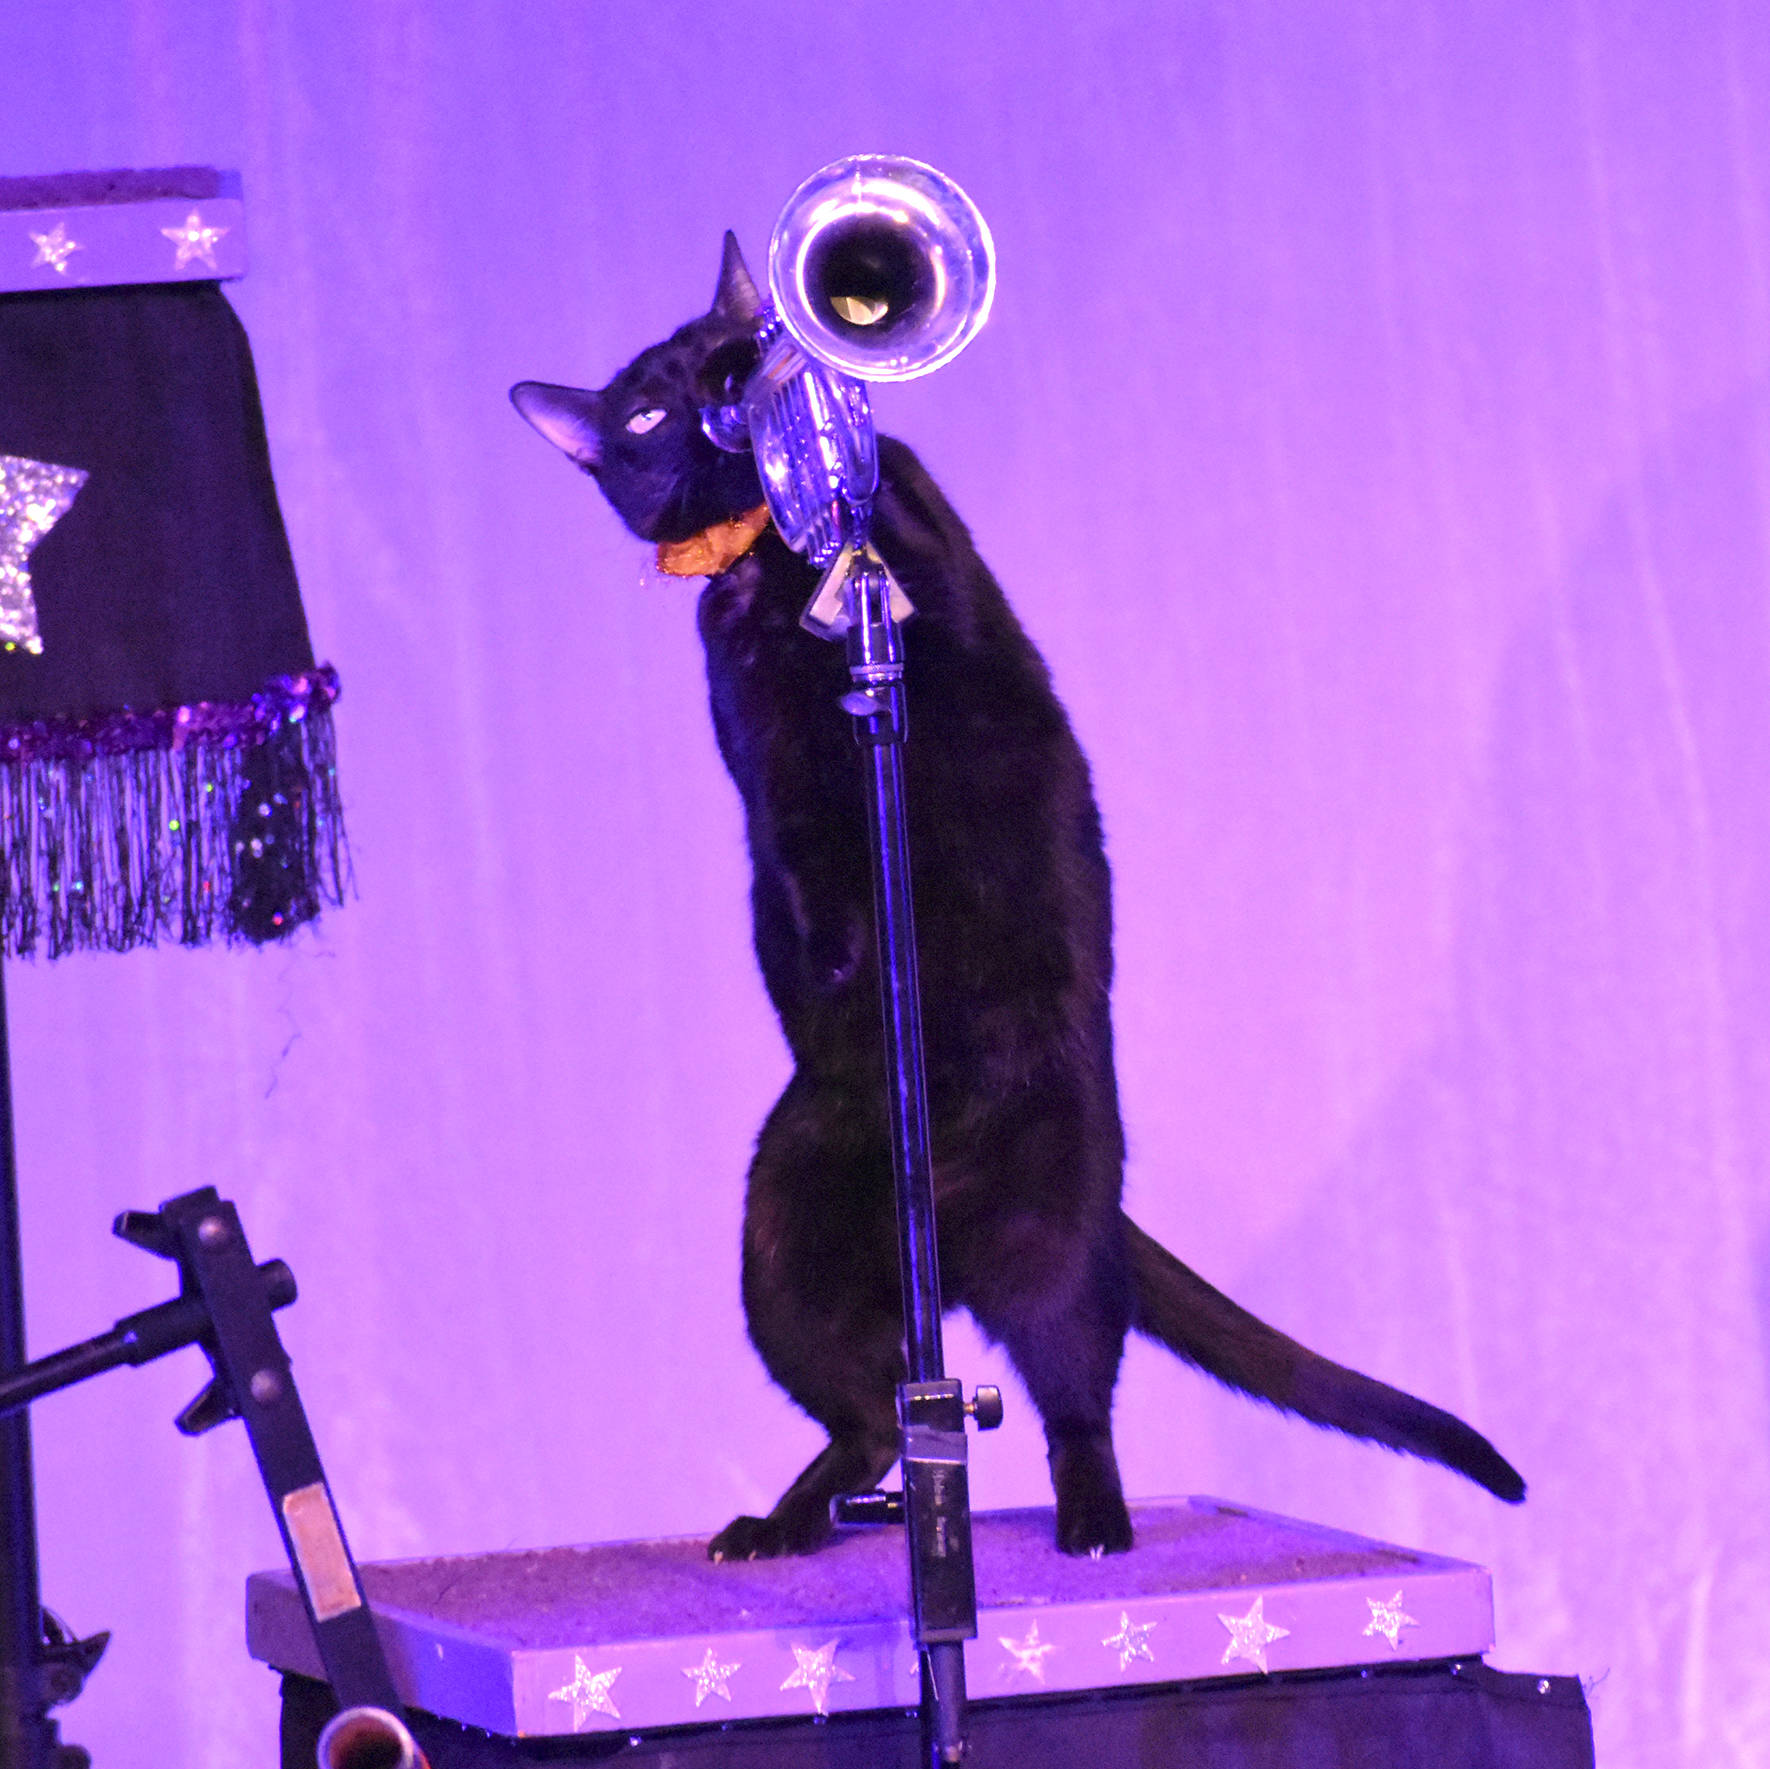 Buggles plays the trumpet at the Acro-Cats with the Rock Cats Performance at the Carco Theatre in Renton on May 21. This is the first of three shows the Rock Cats will be performing. Photo by Kayse Angel